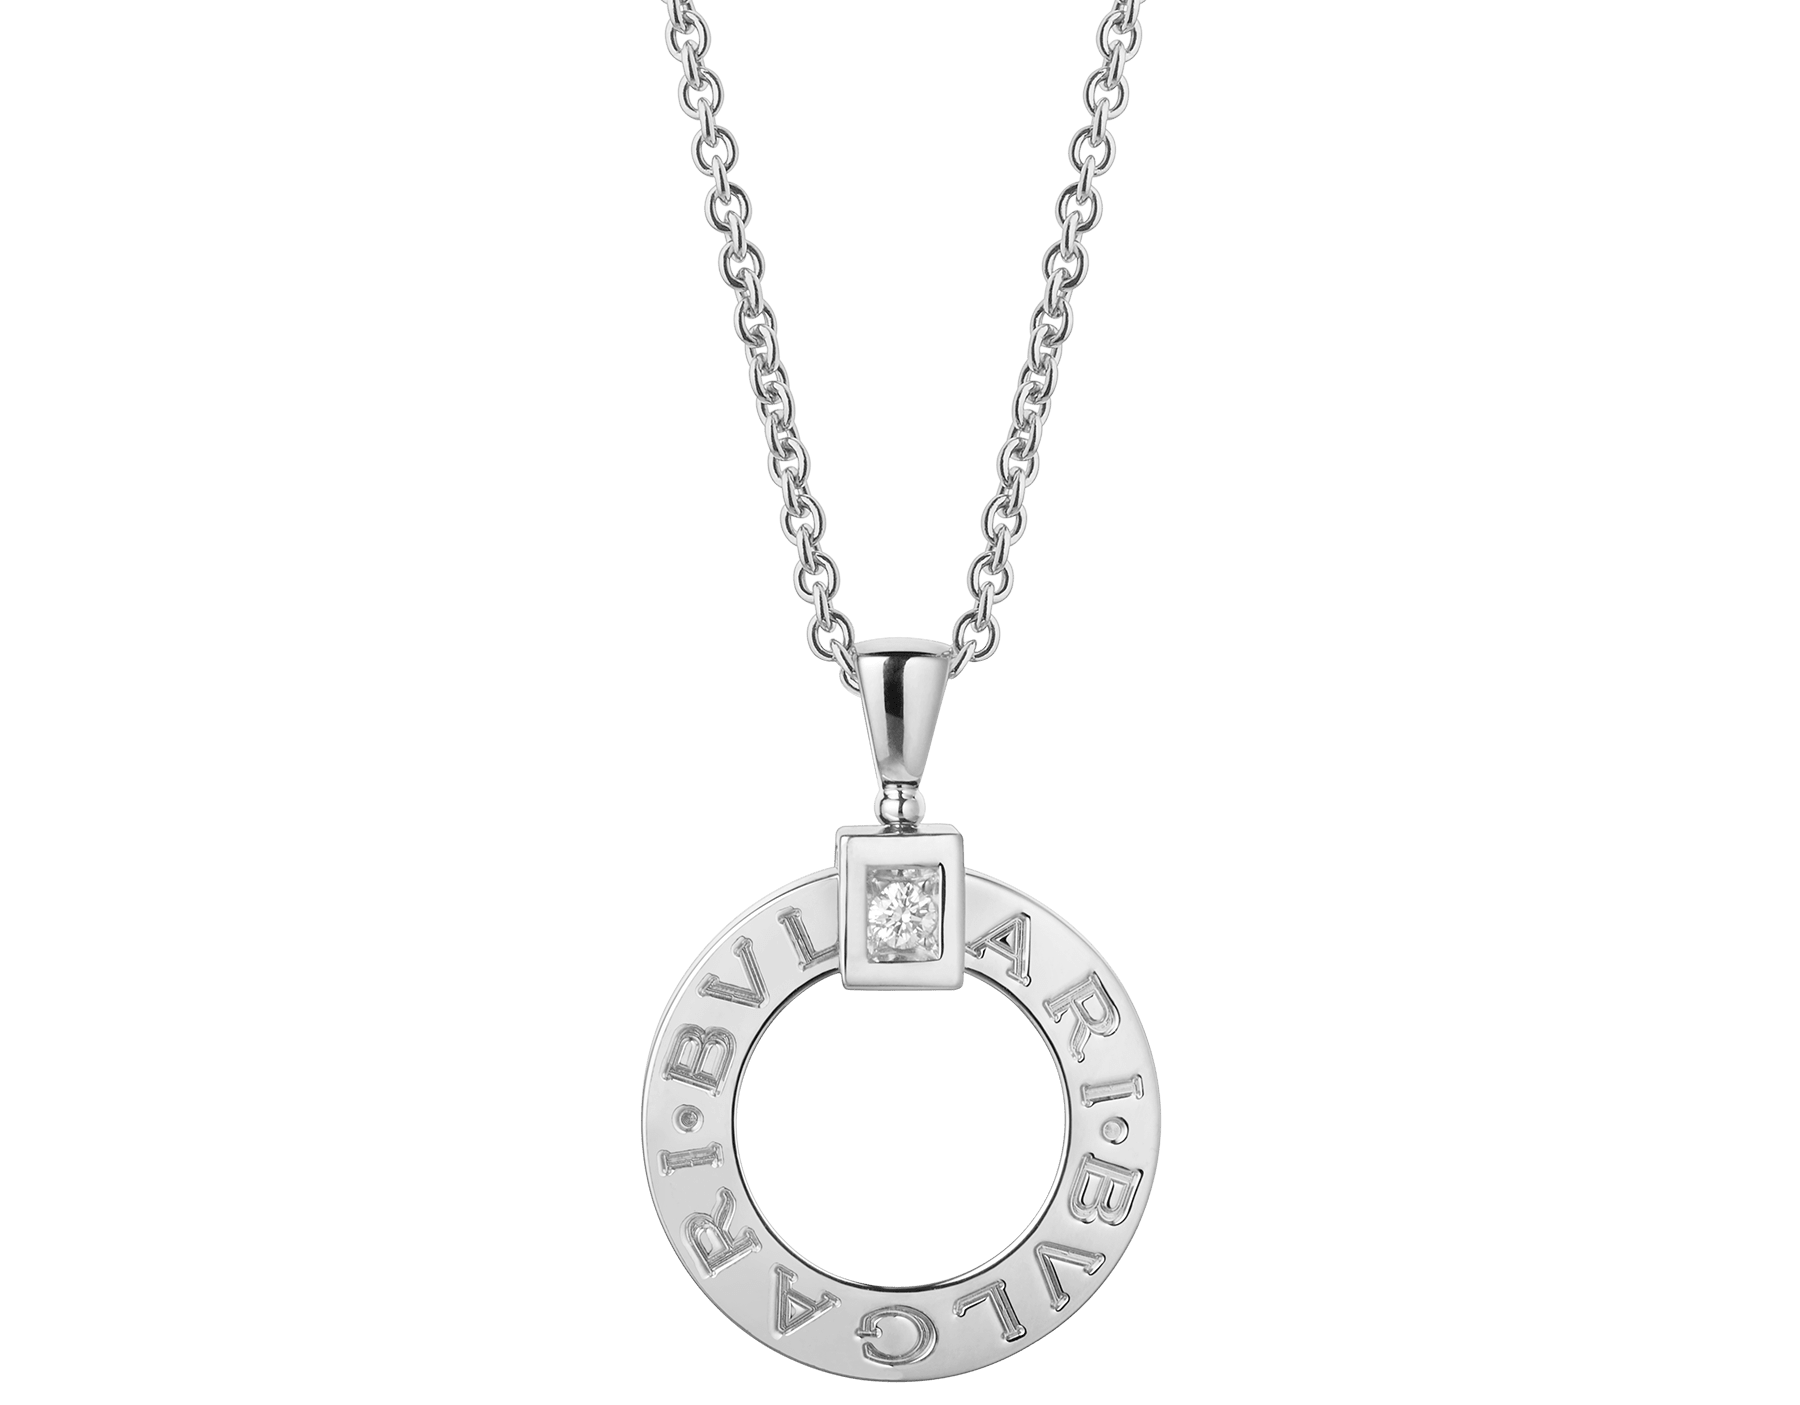 BVLGARI BVLGARI necklace with 18 kt white gold chain and 18 kt white gold pendant set with a diamond 342074 image 1